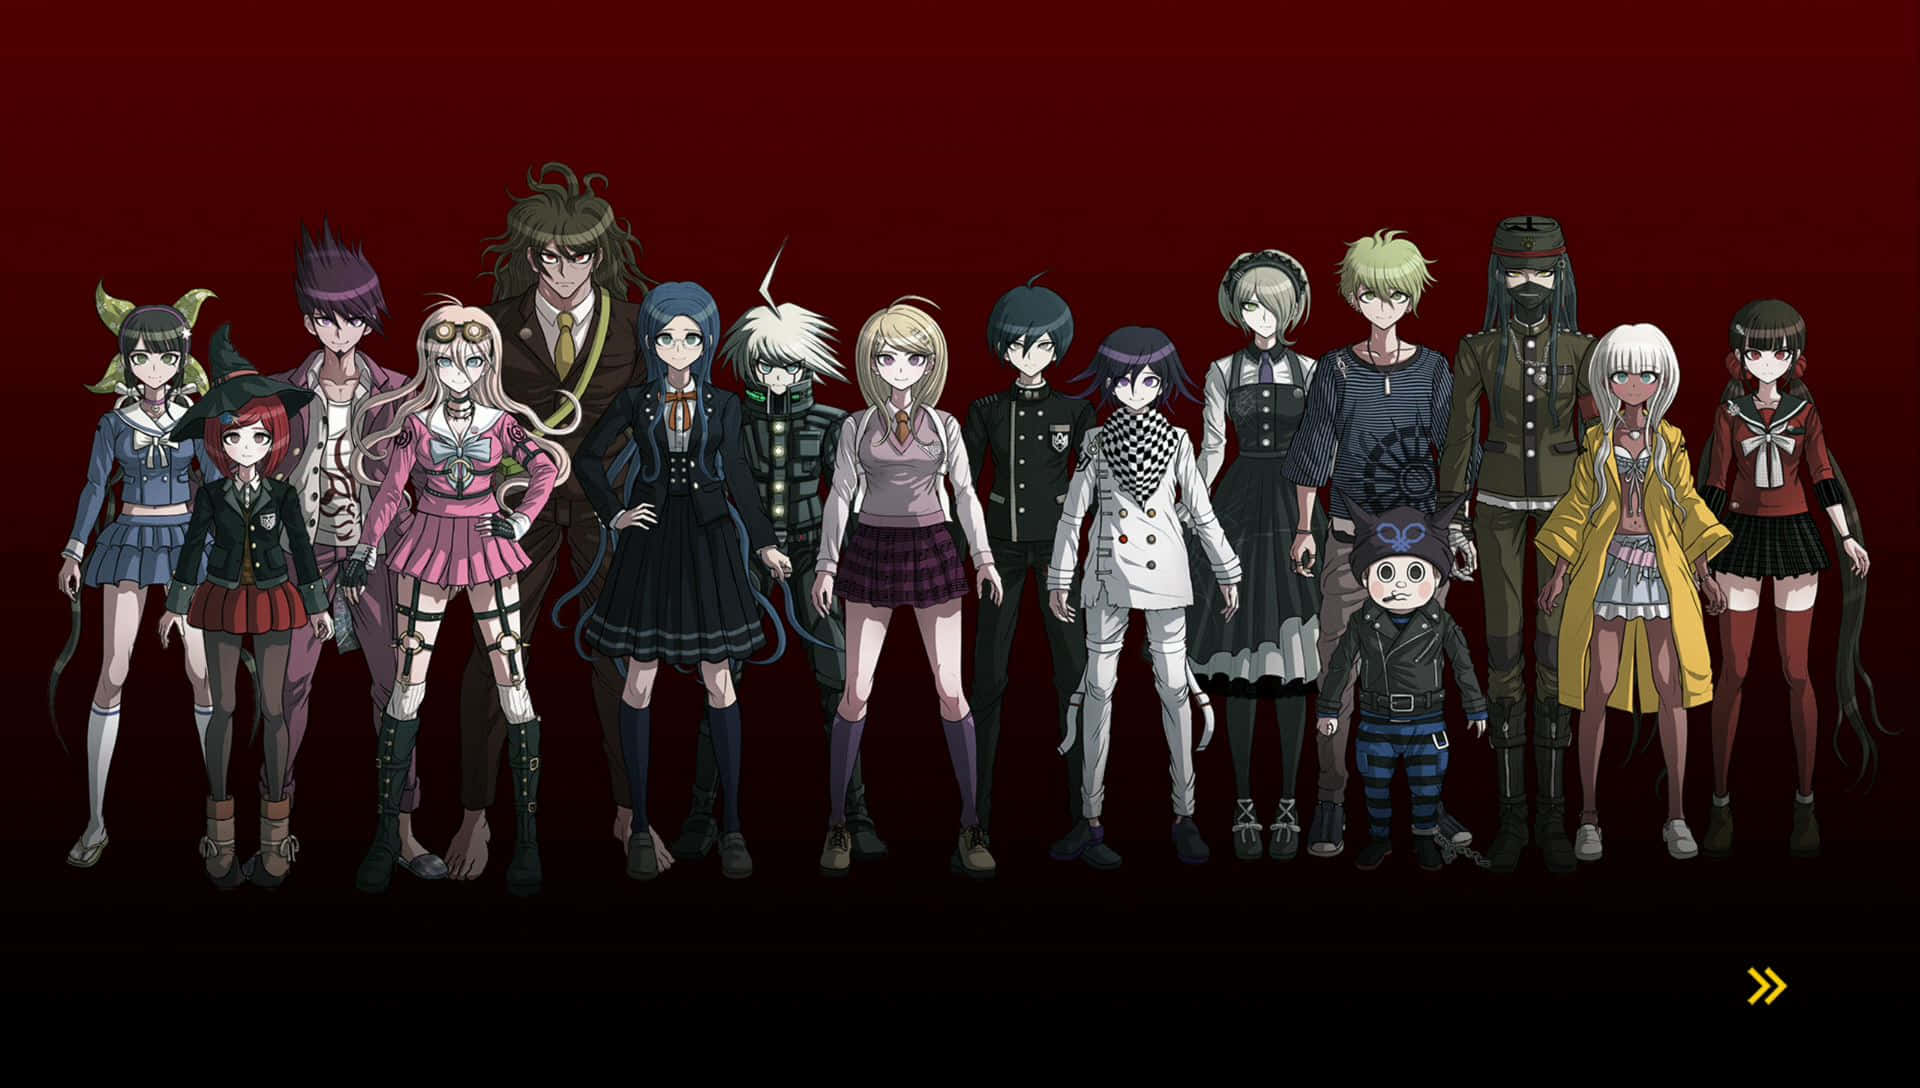 A group of Danganronpa students stand together